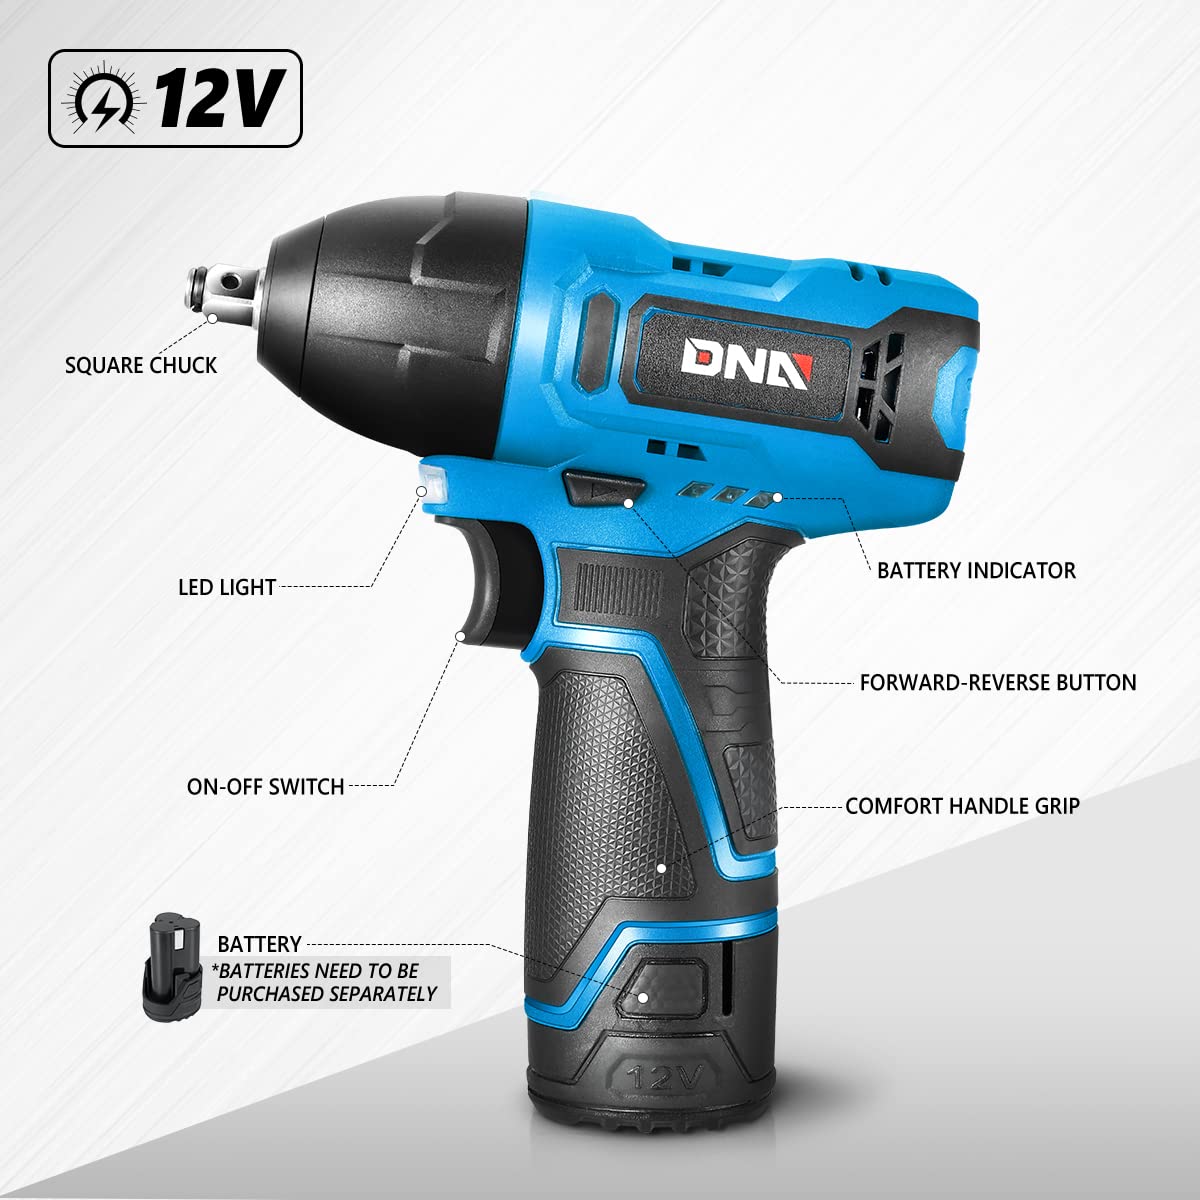 DNA MOTORING TOOLS-00159 Cordless Impact Wrench, 3/8” Chuck Max Torque 120Nm 12V Electric Power Impact Wrench with LED Work Light,Blue (Tool Only)